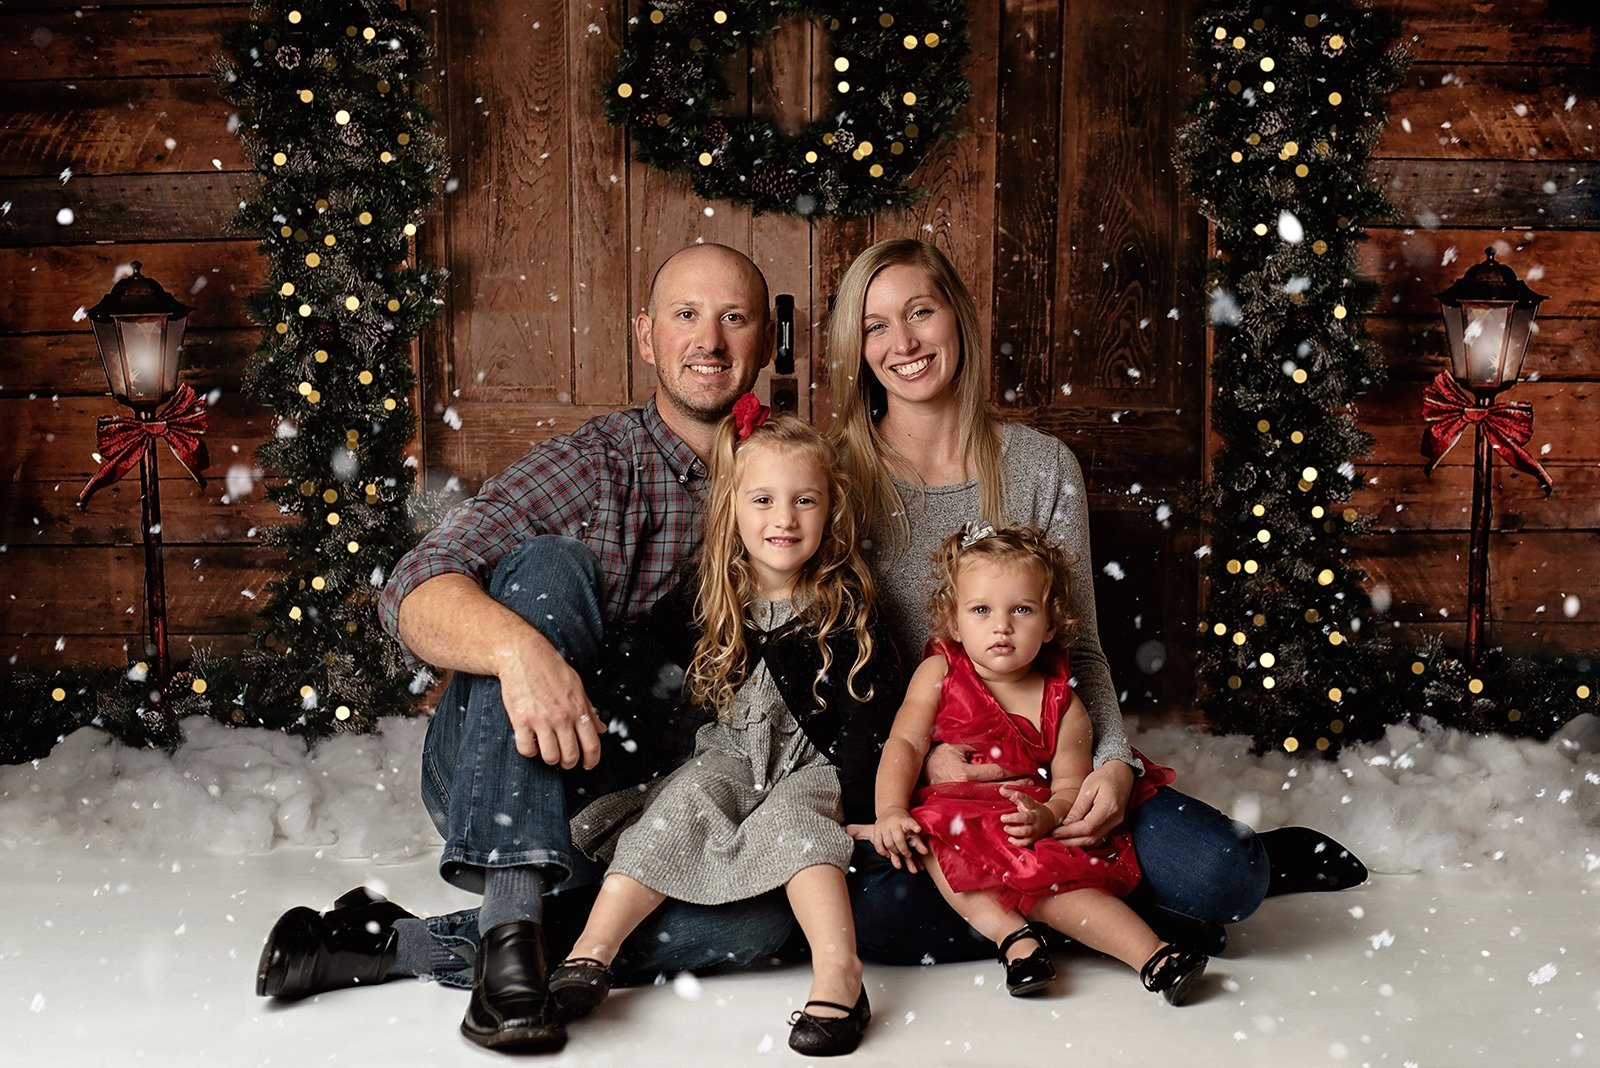 HOLIDAY MINI SESSIONS!